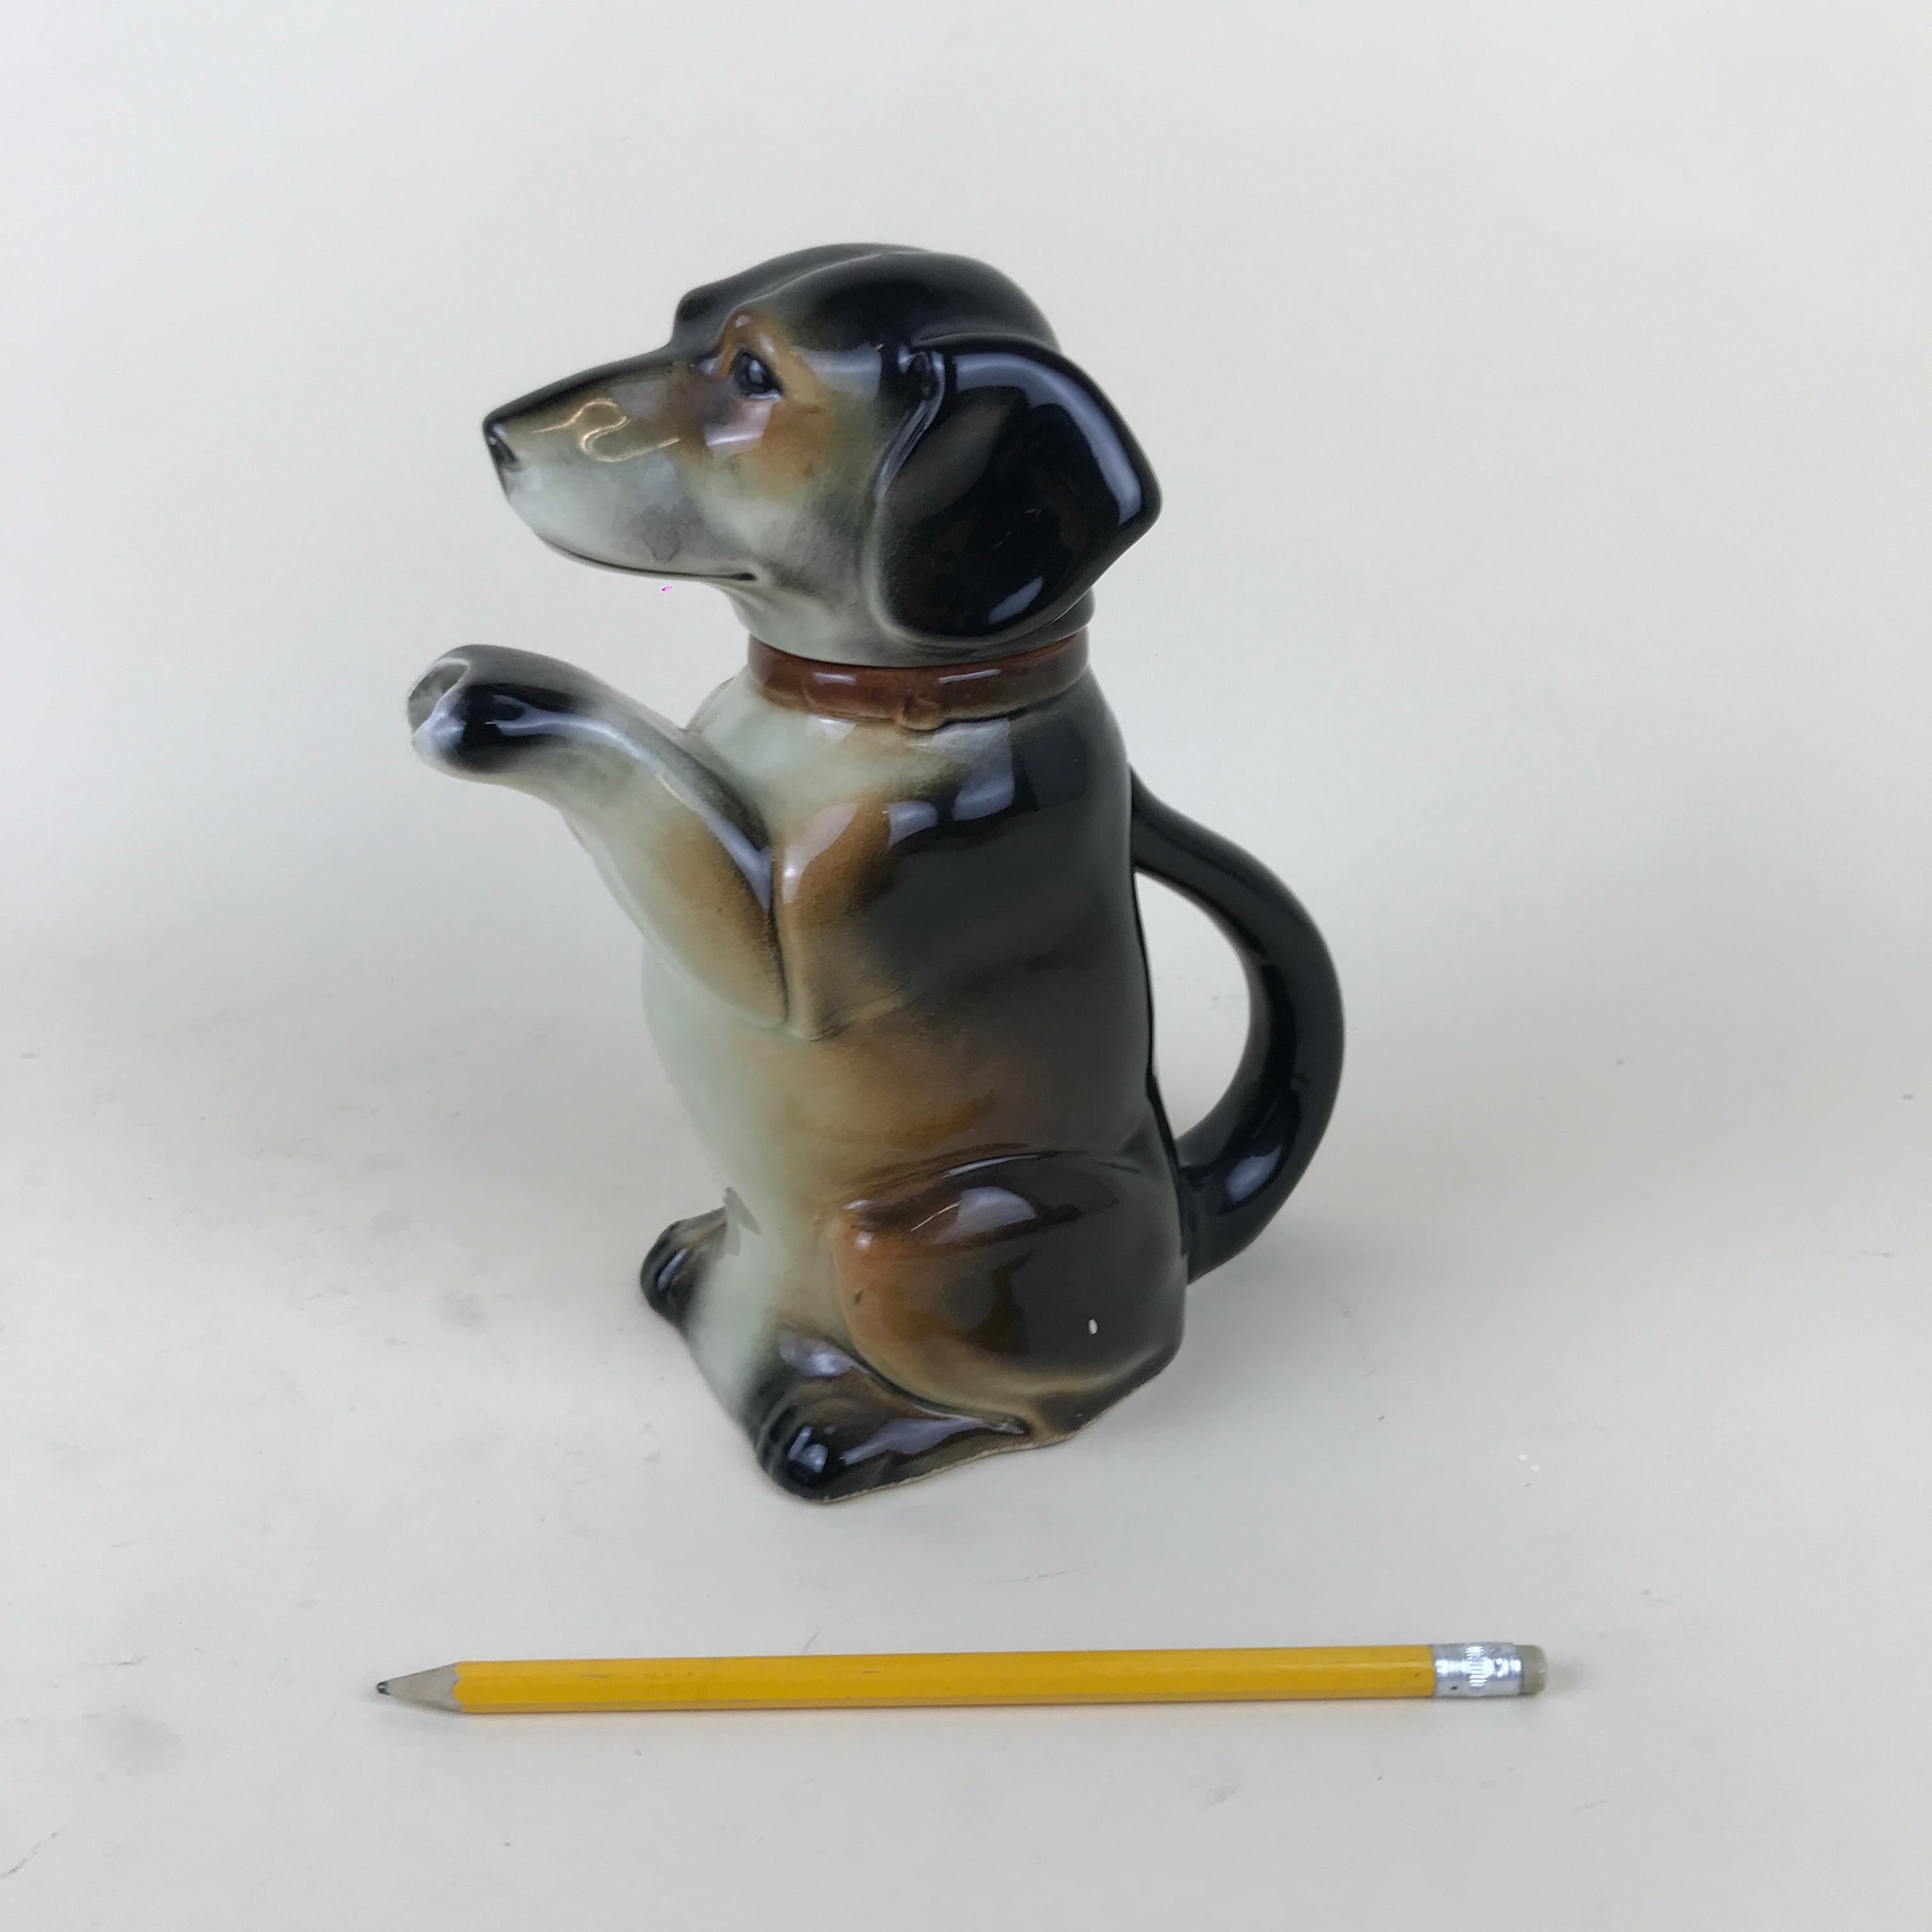 Art pottery dog figure teapot made by Erphila in Germany between 1945 and 1949.

This rare teapot is in majolica glazed. Even if the model 6703B was produced from the 1920s onwards we know a more precise production date from the bottom stamp 